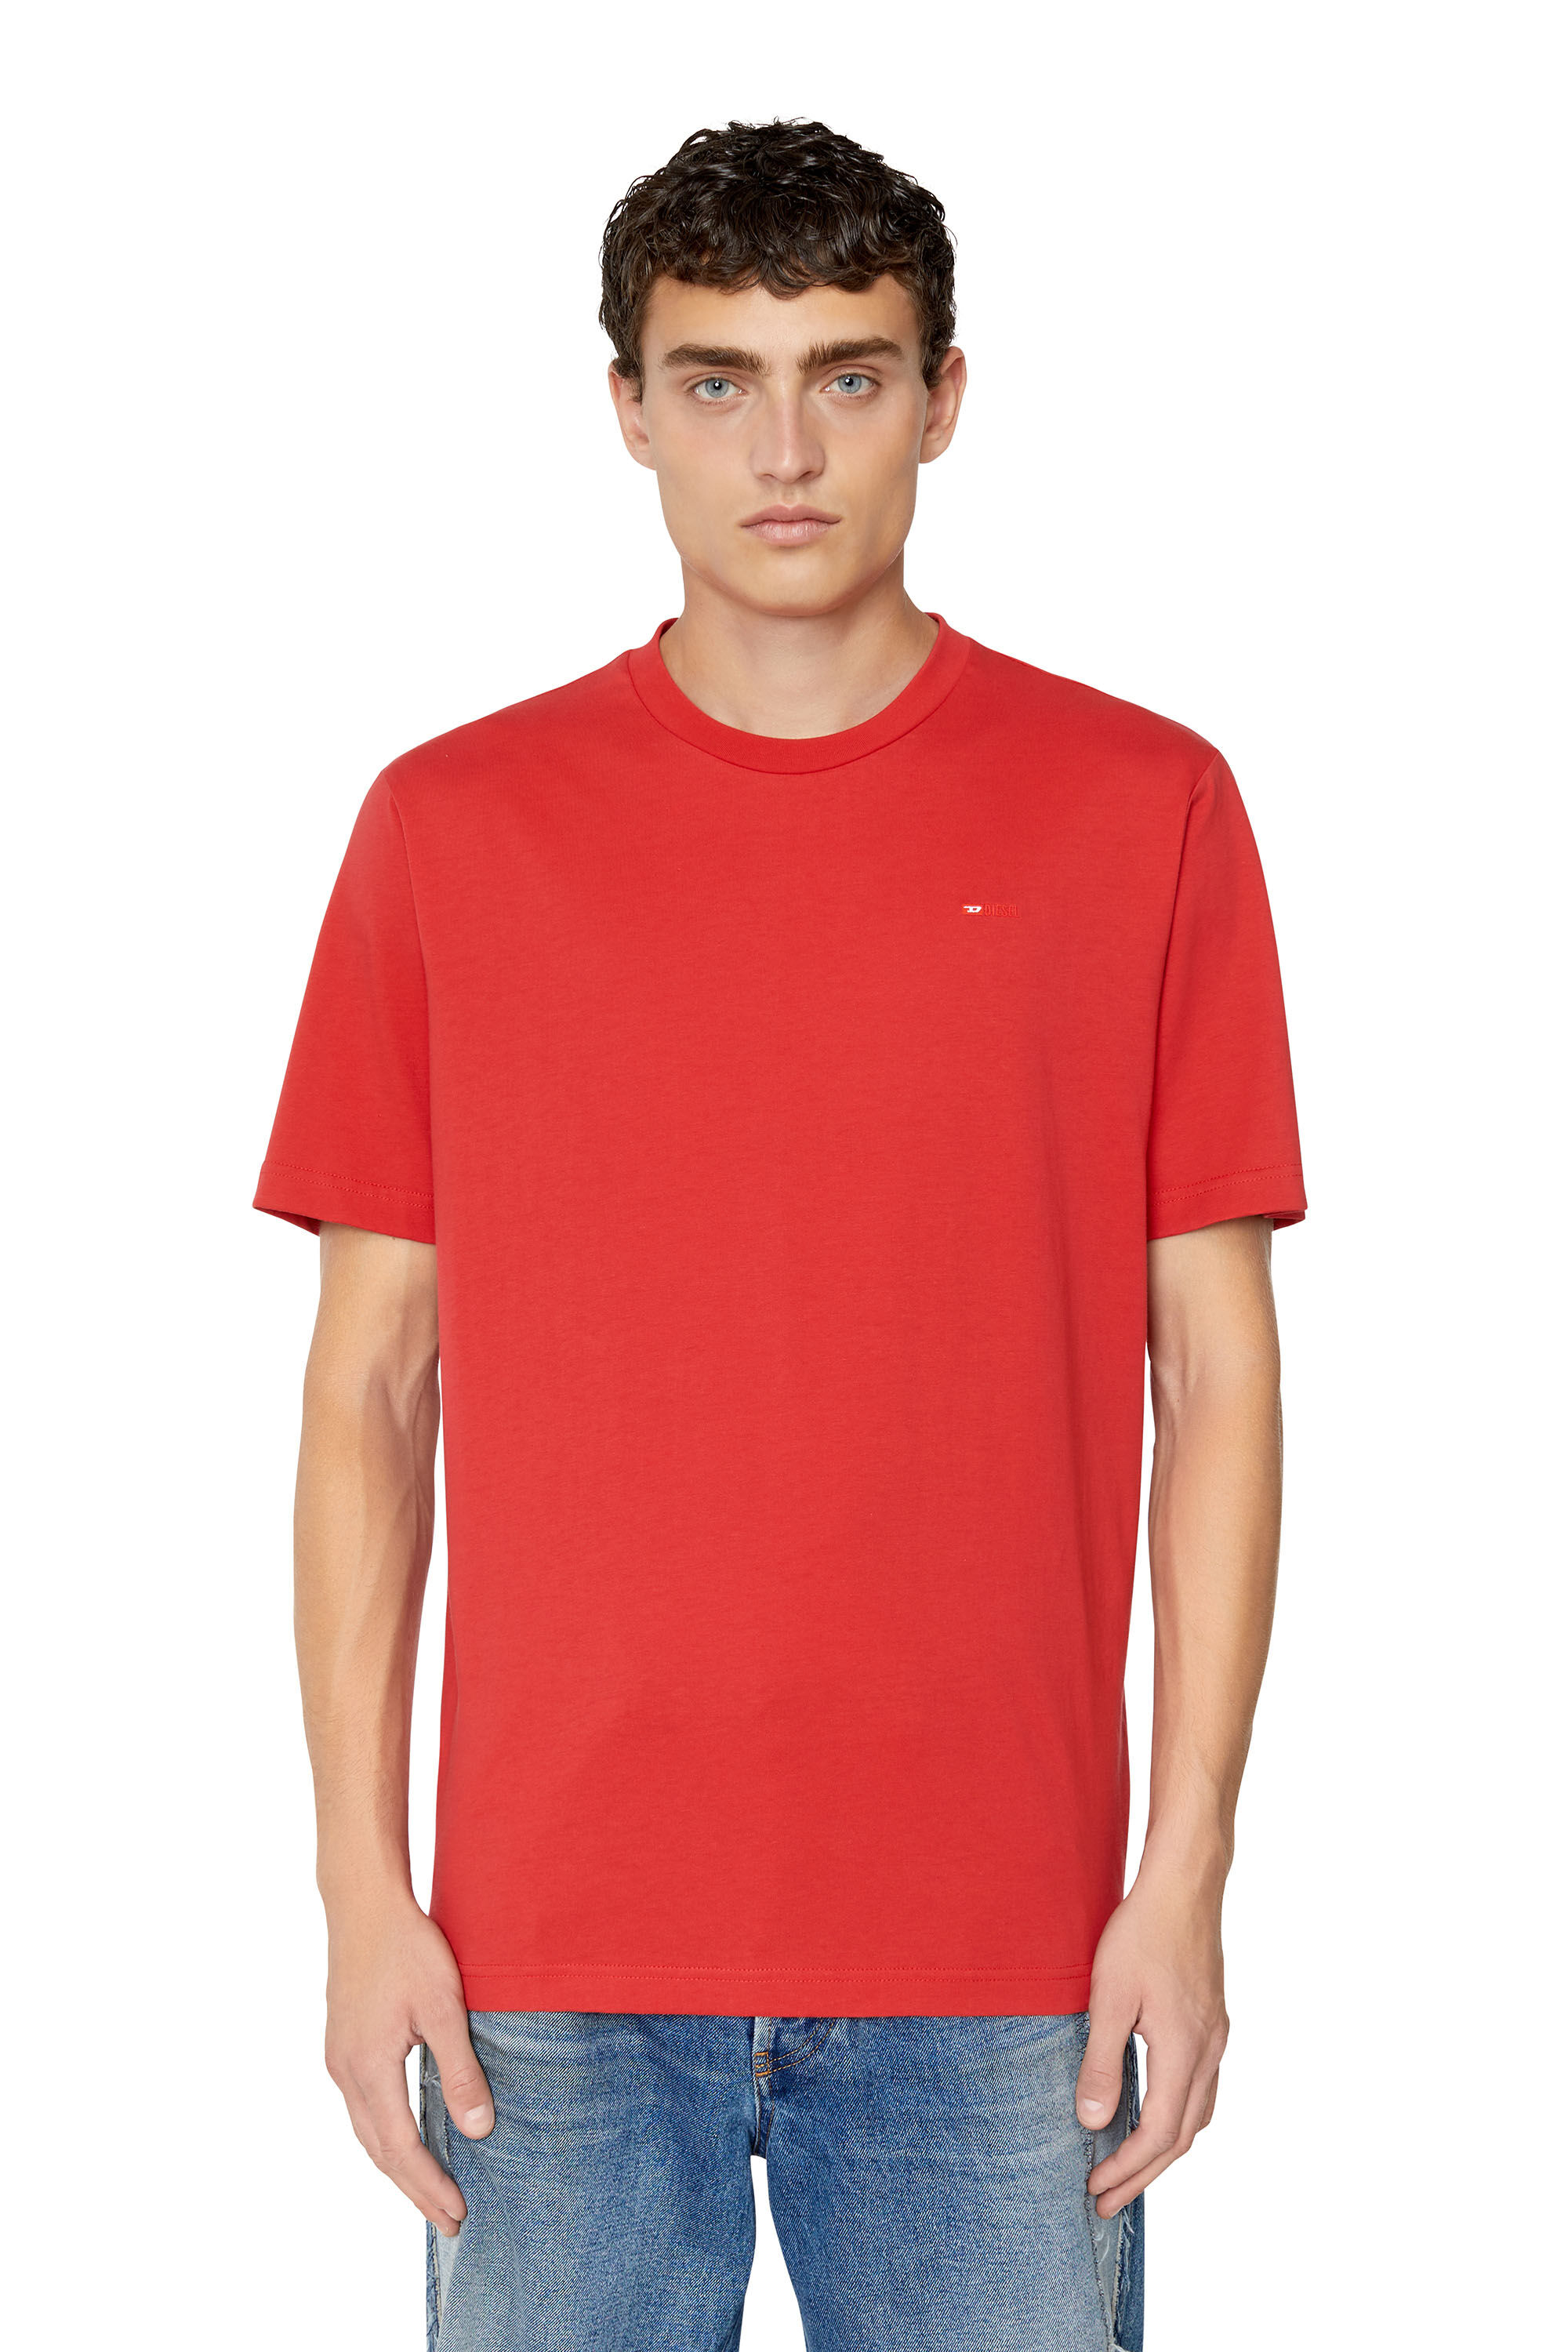 Diesel - T-JUST-MICRODIV, Rosso - Image 3